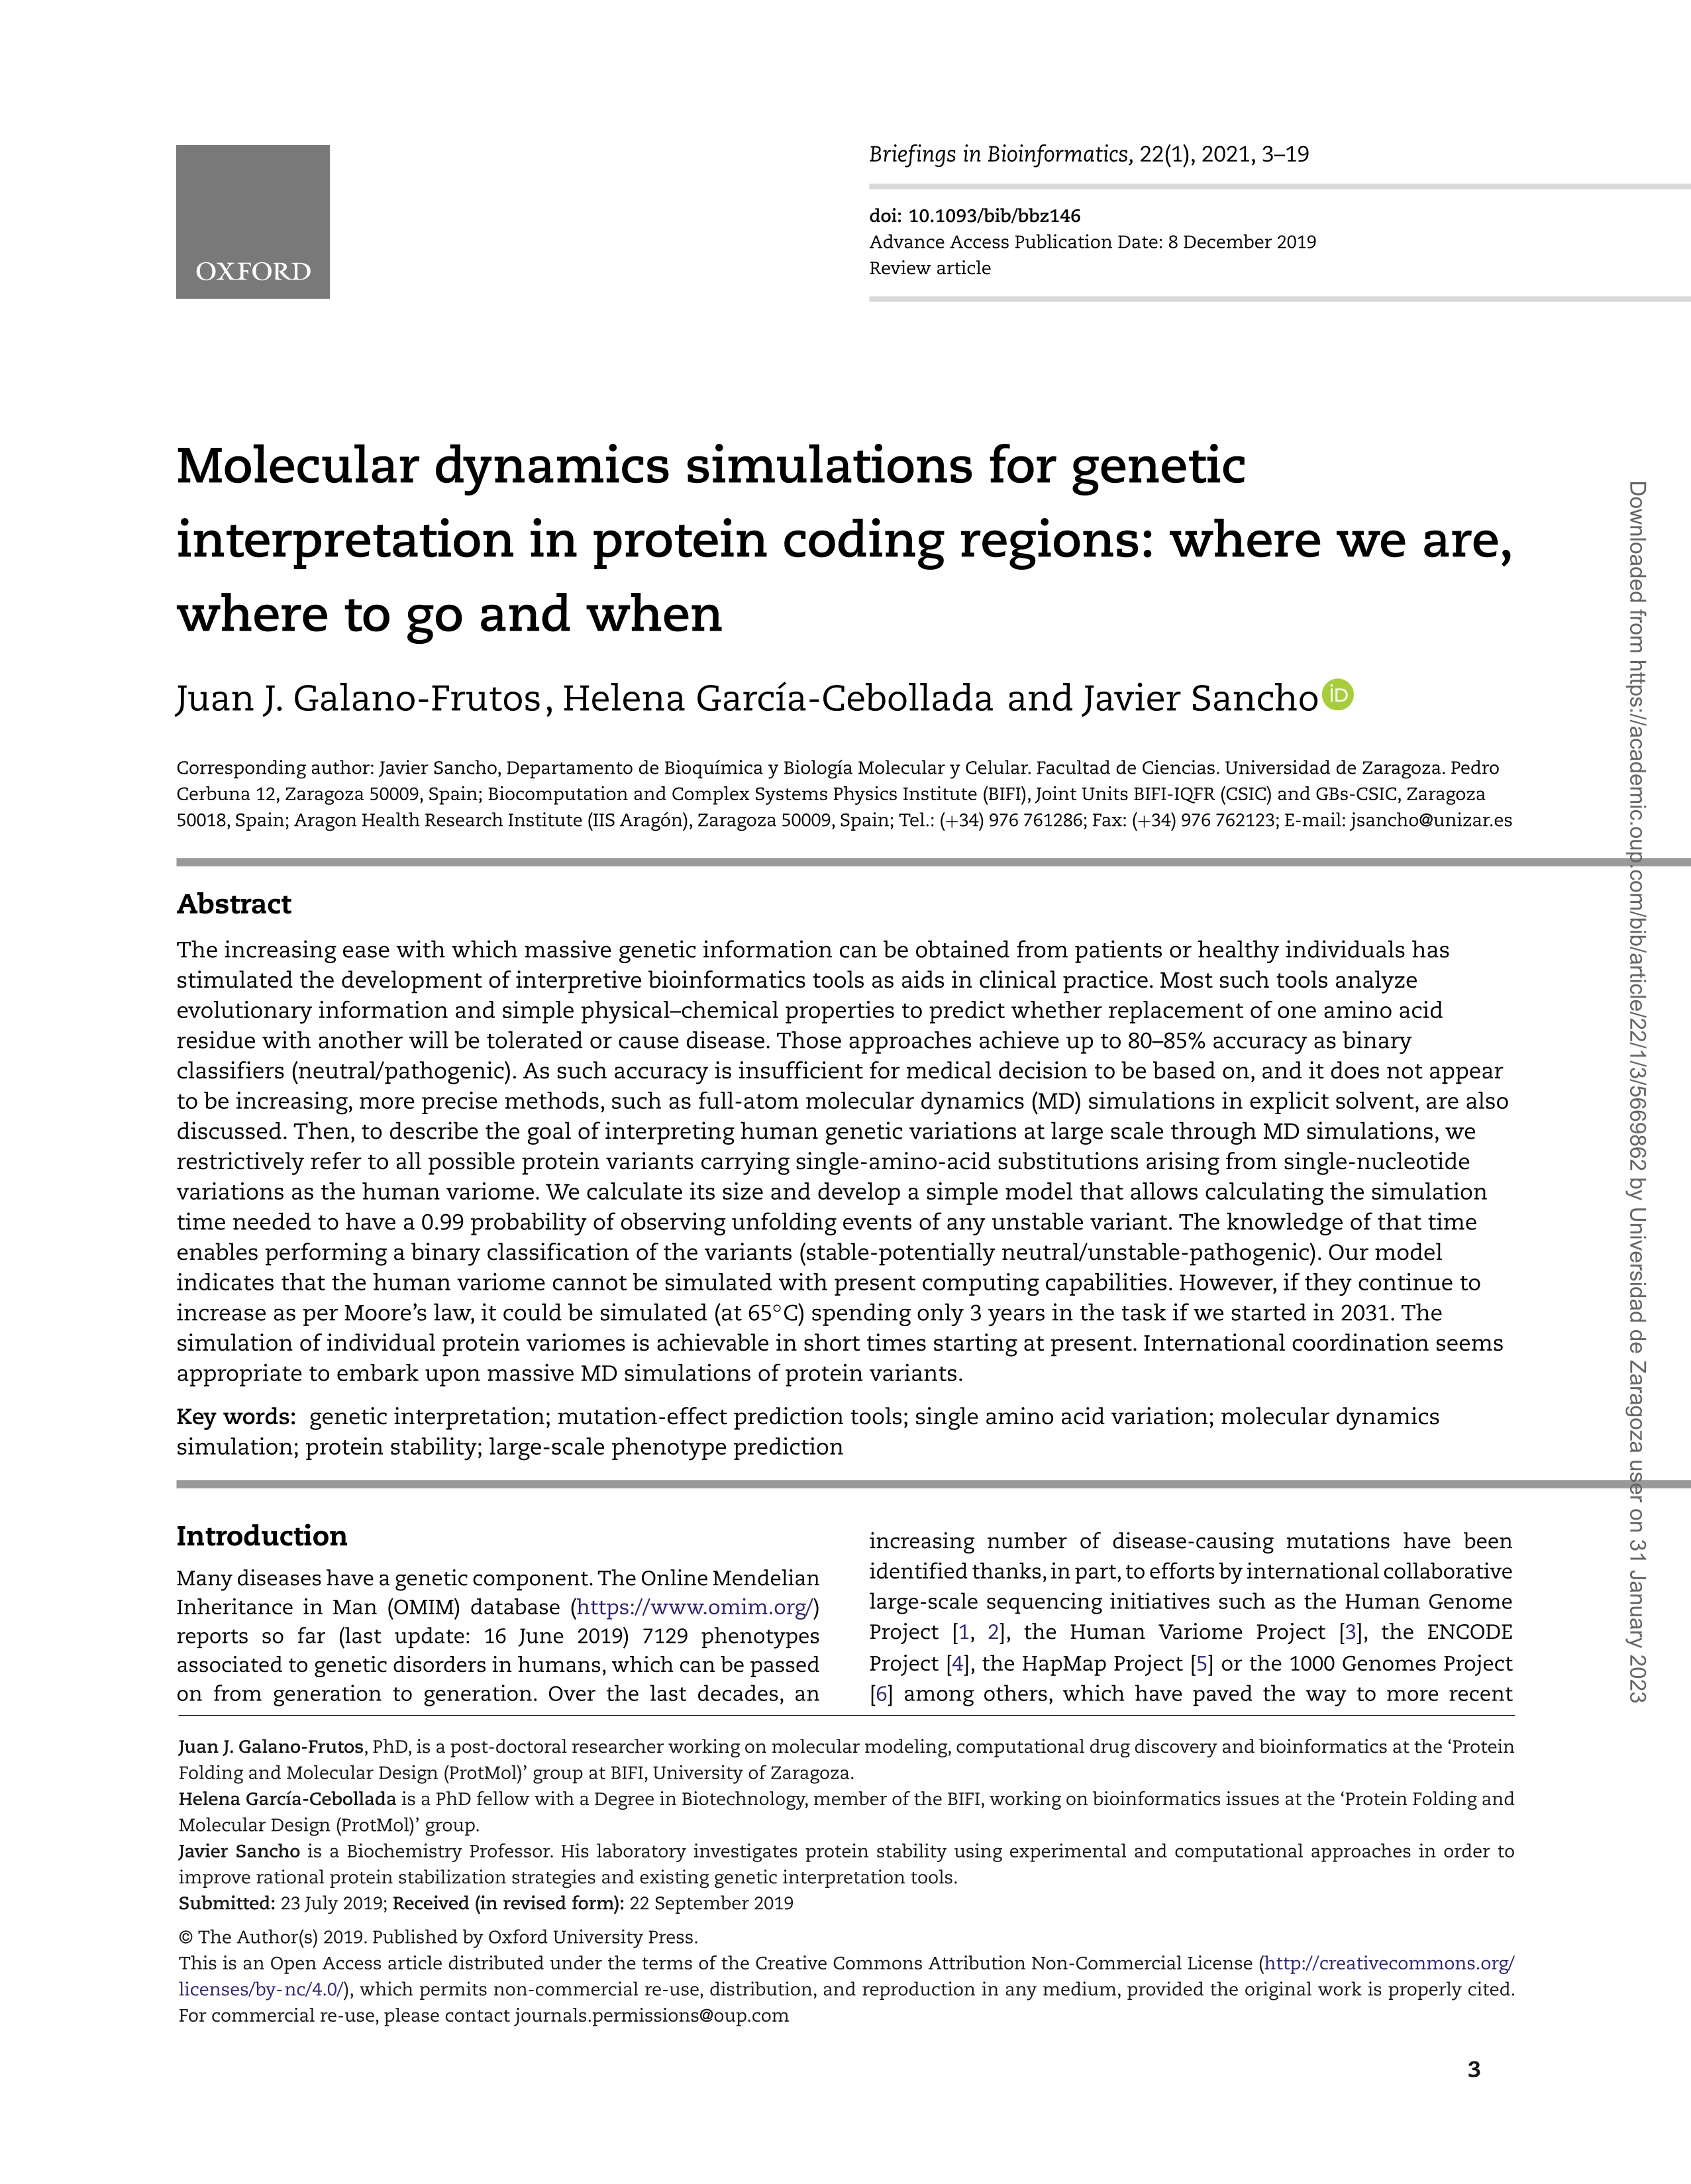 Molecular dynamics simulations for genetic interpretation in protein coding regions: where we are, where to go and when